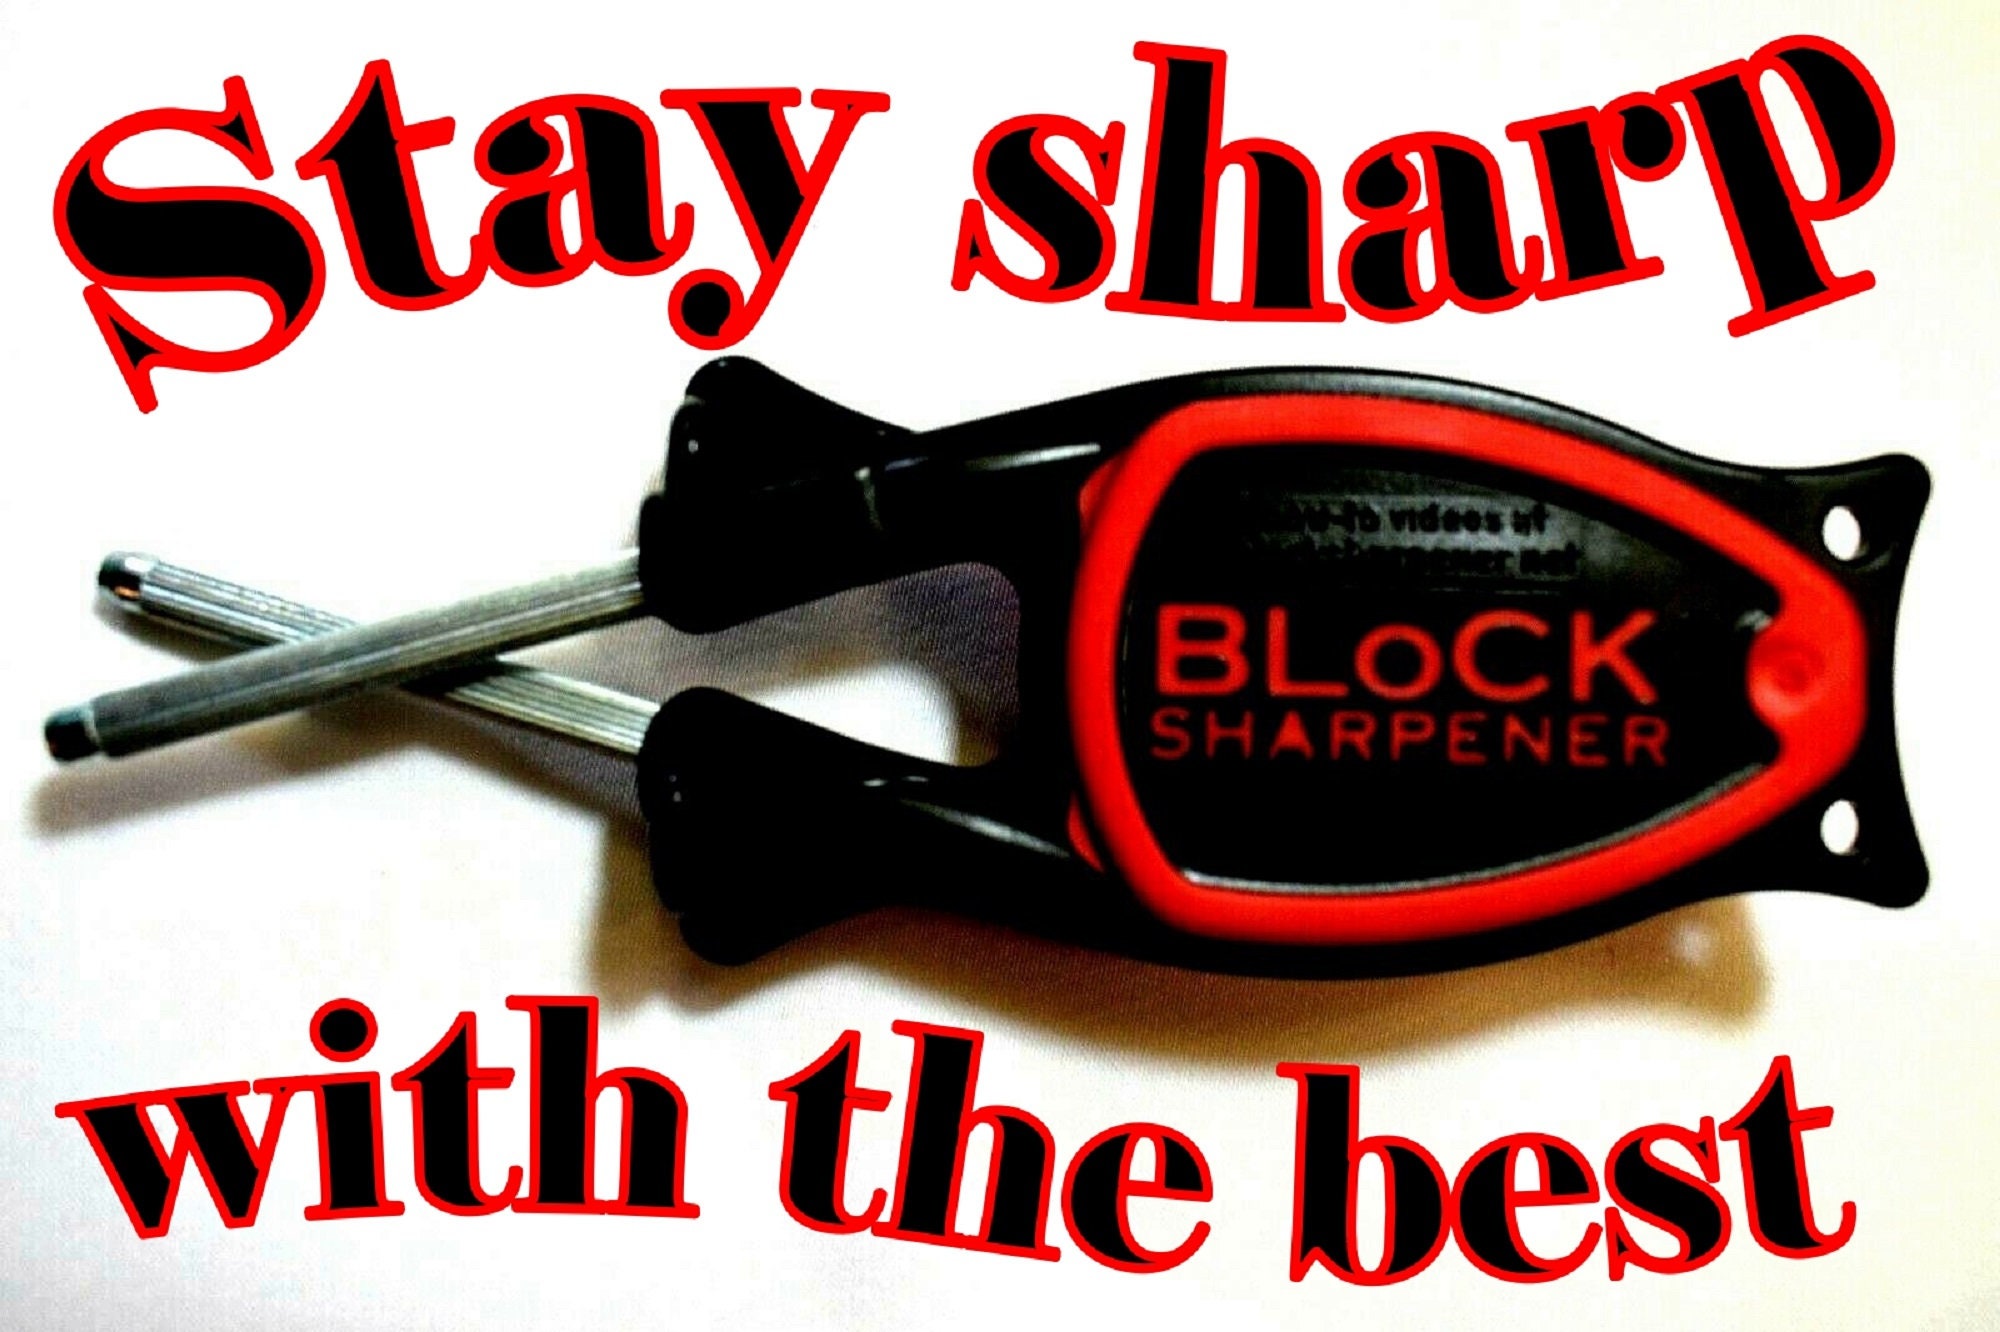 Block Knife Sharpener are Patent sharpener made to reline and hone